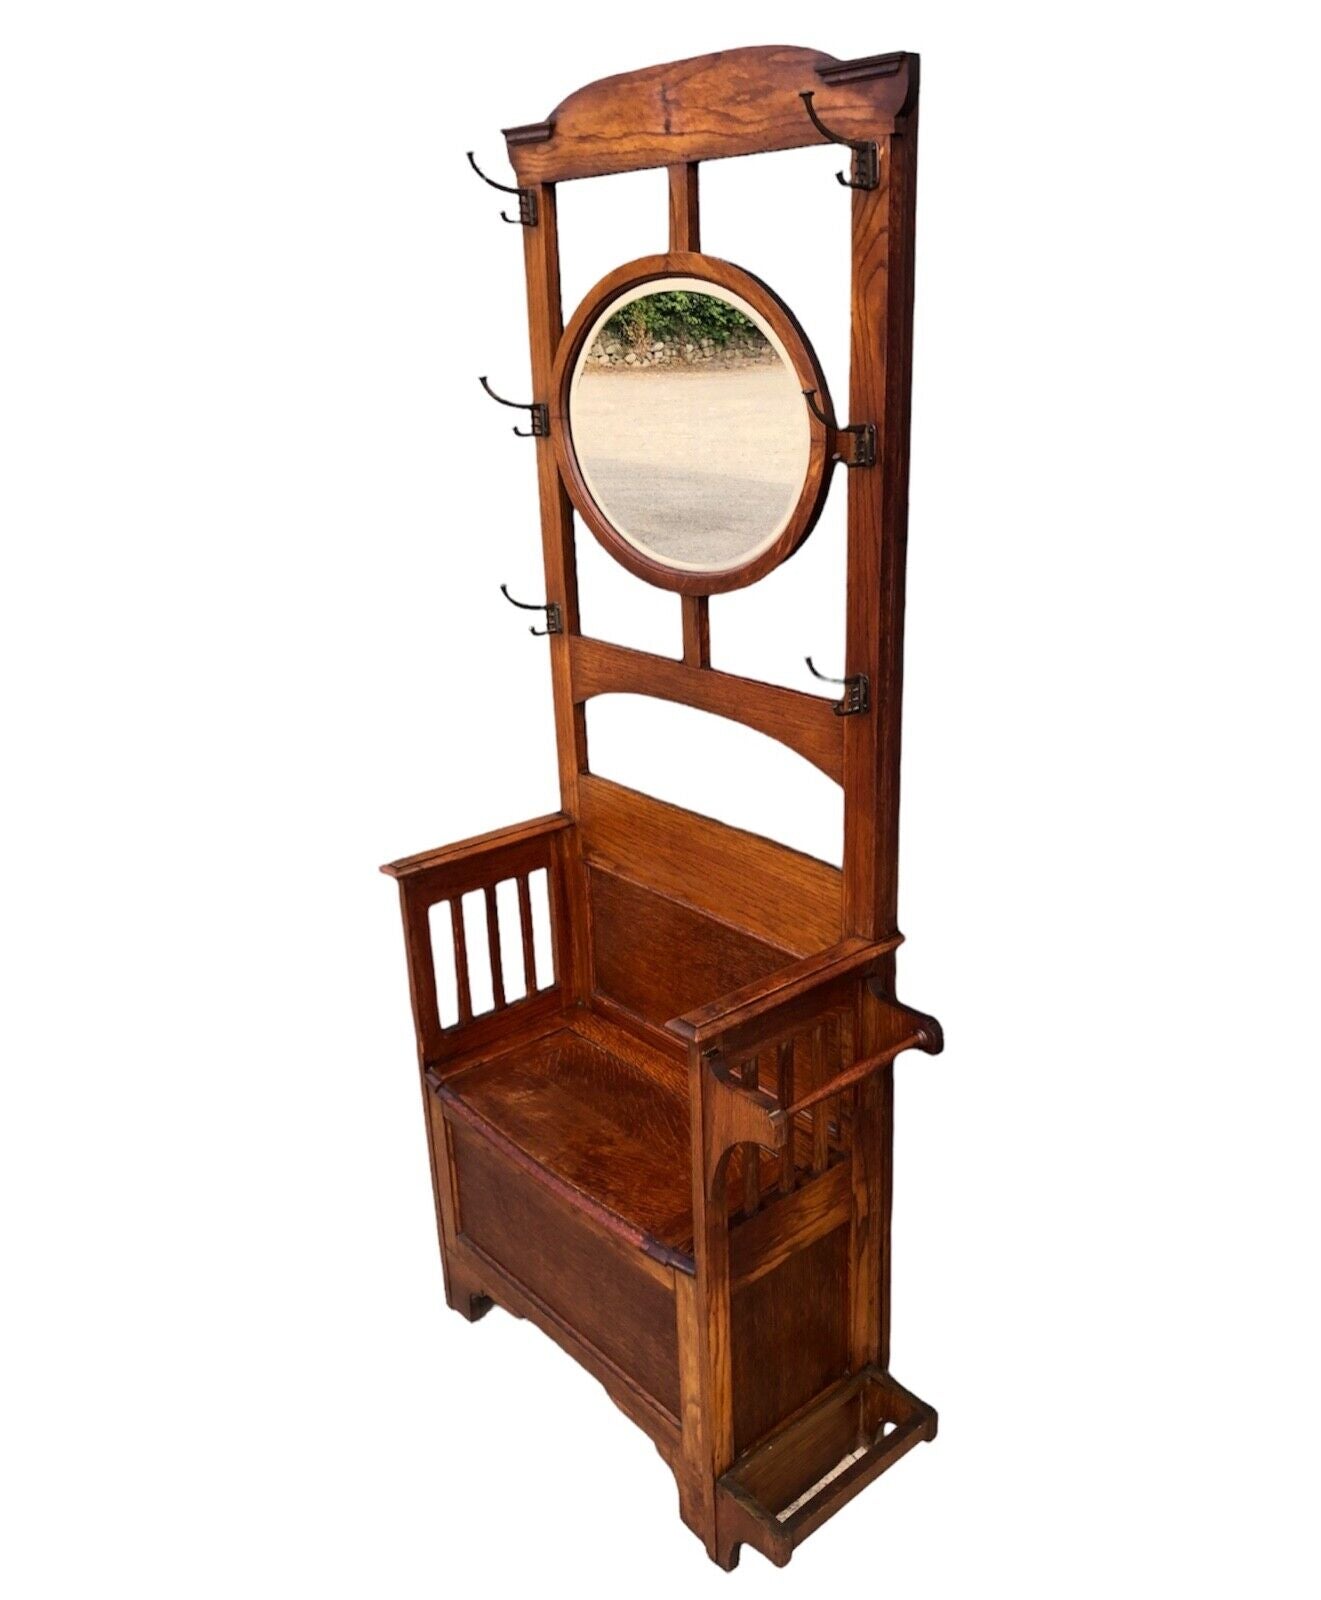 000939....Arts And Crafts Vintage Oak Hall Stand With Lift Up Seat